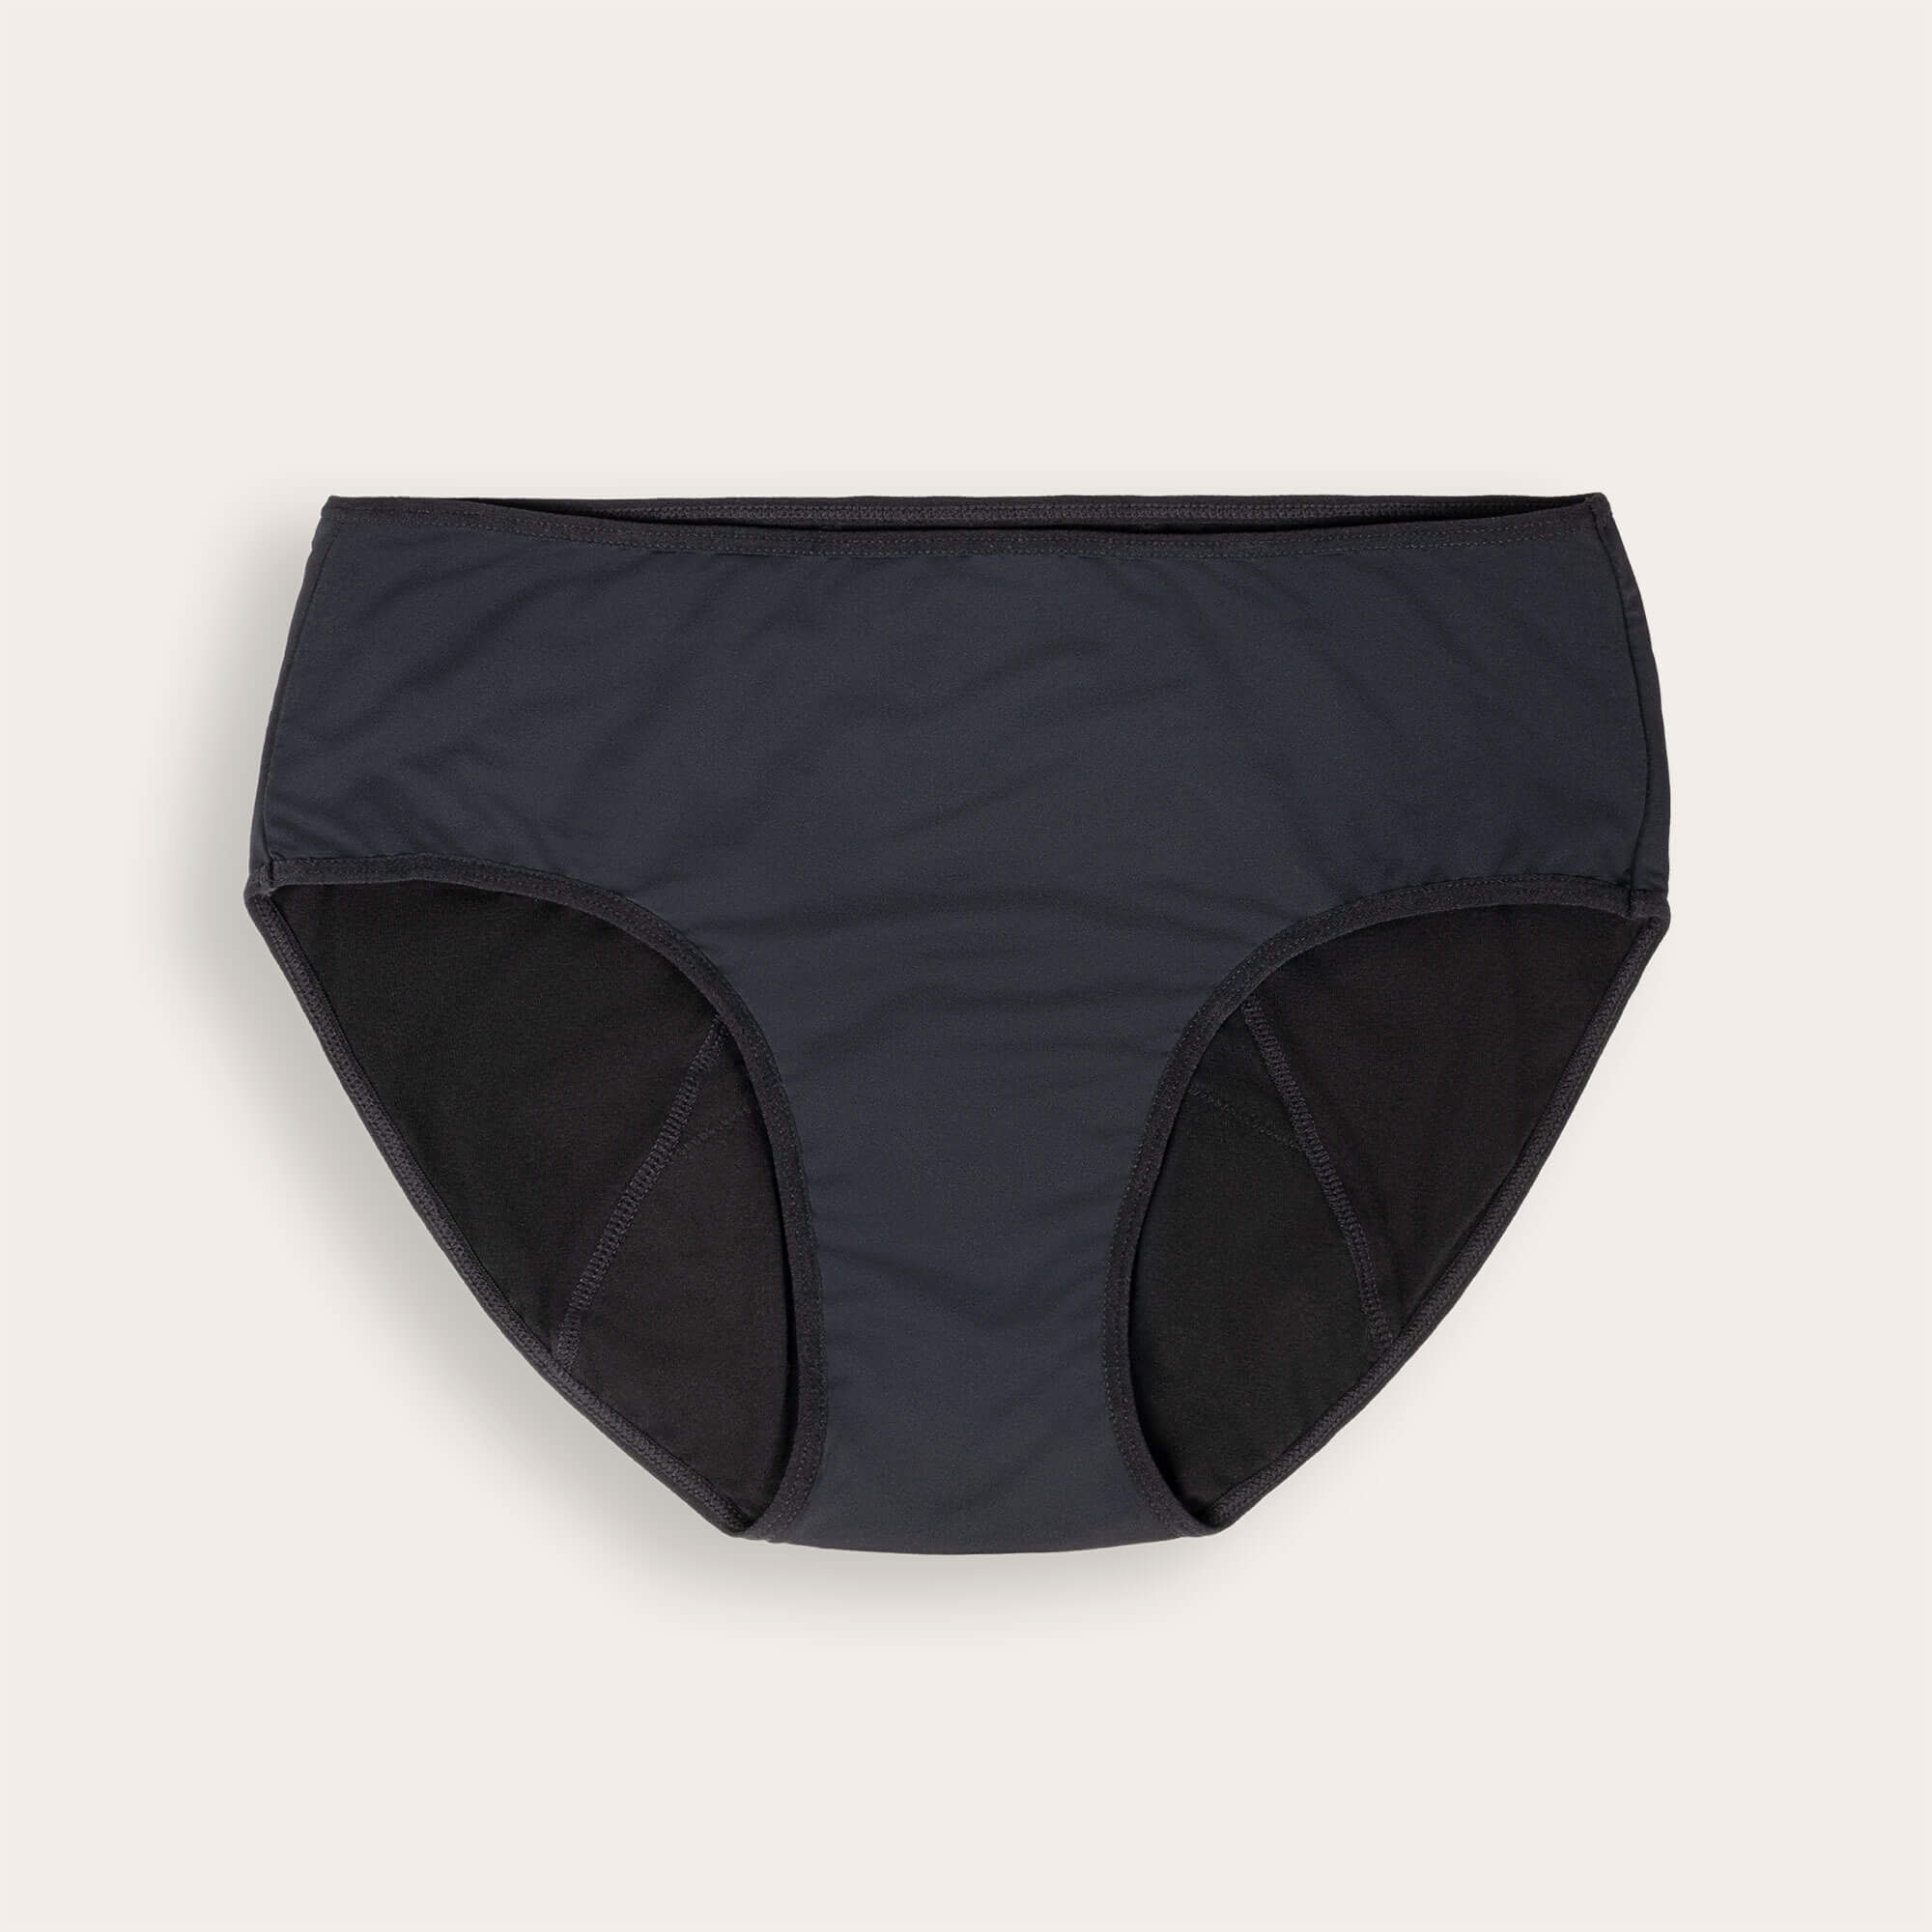 https://thejunecup.com/cdn/shop/products/June_Cup_Black_Period_Underwear.jpg?v=1619459230